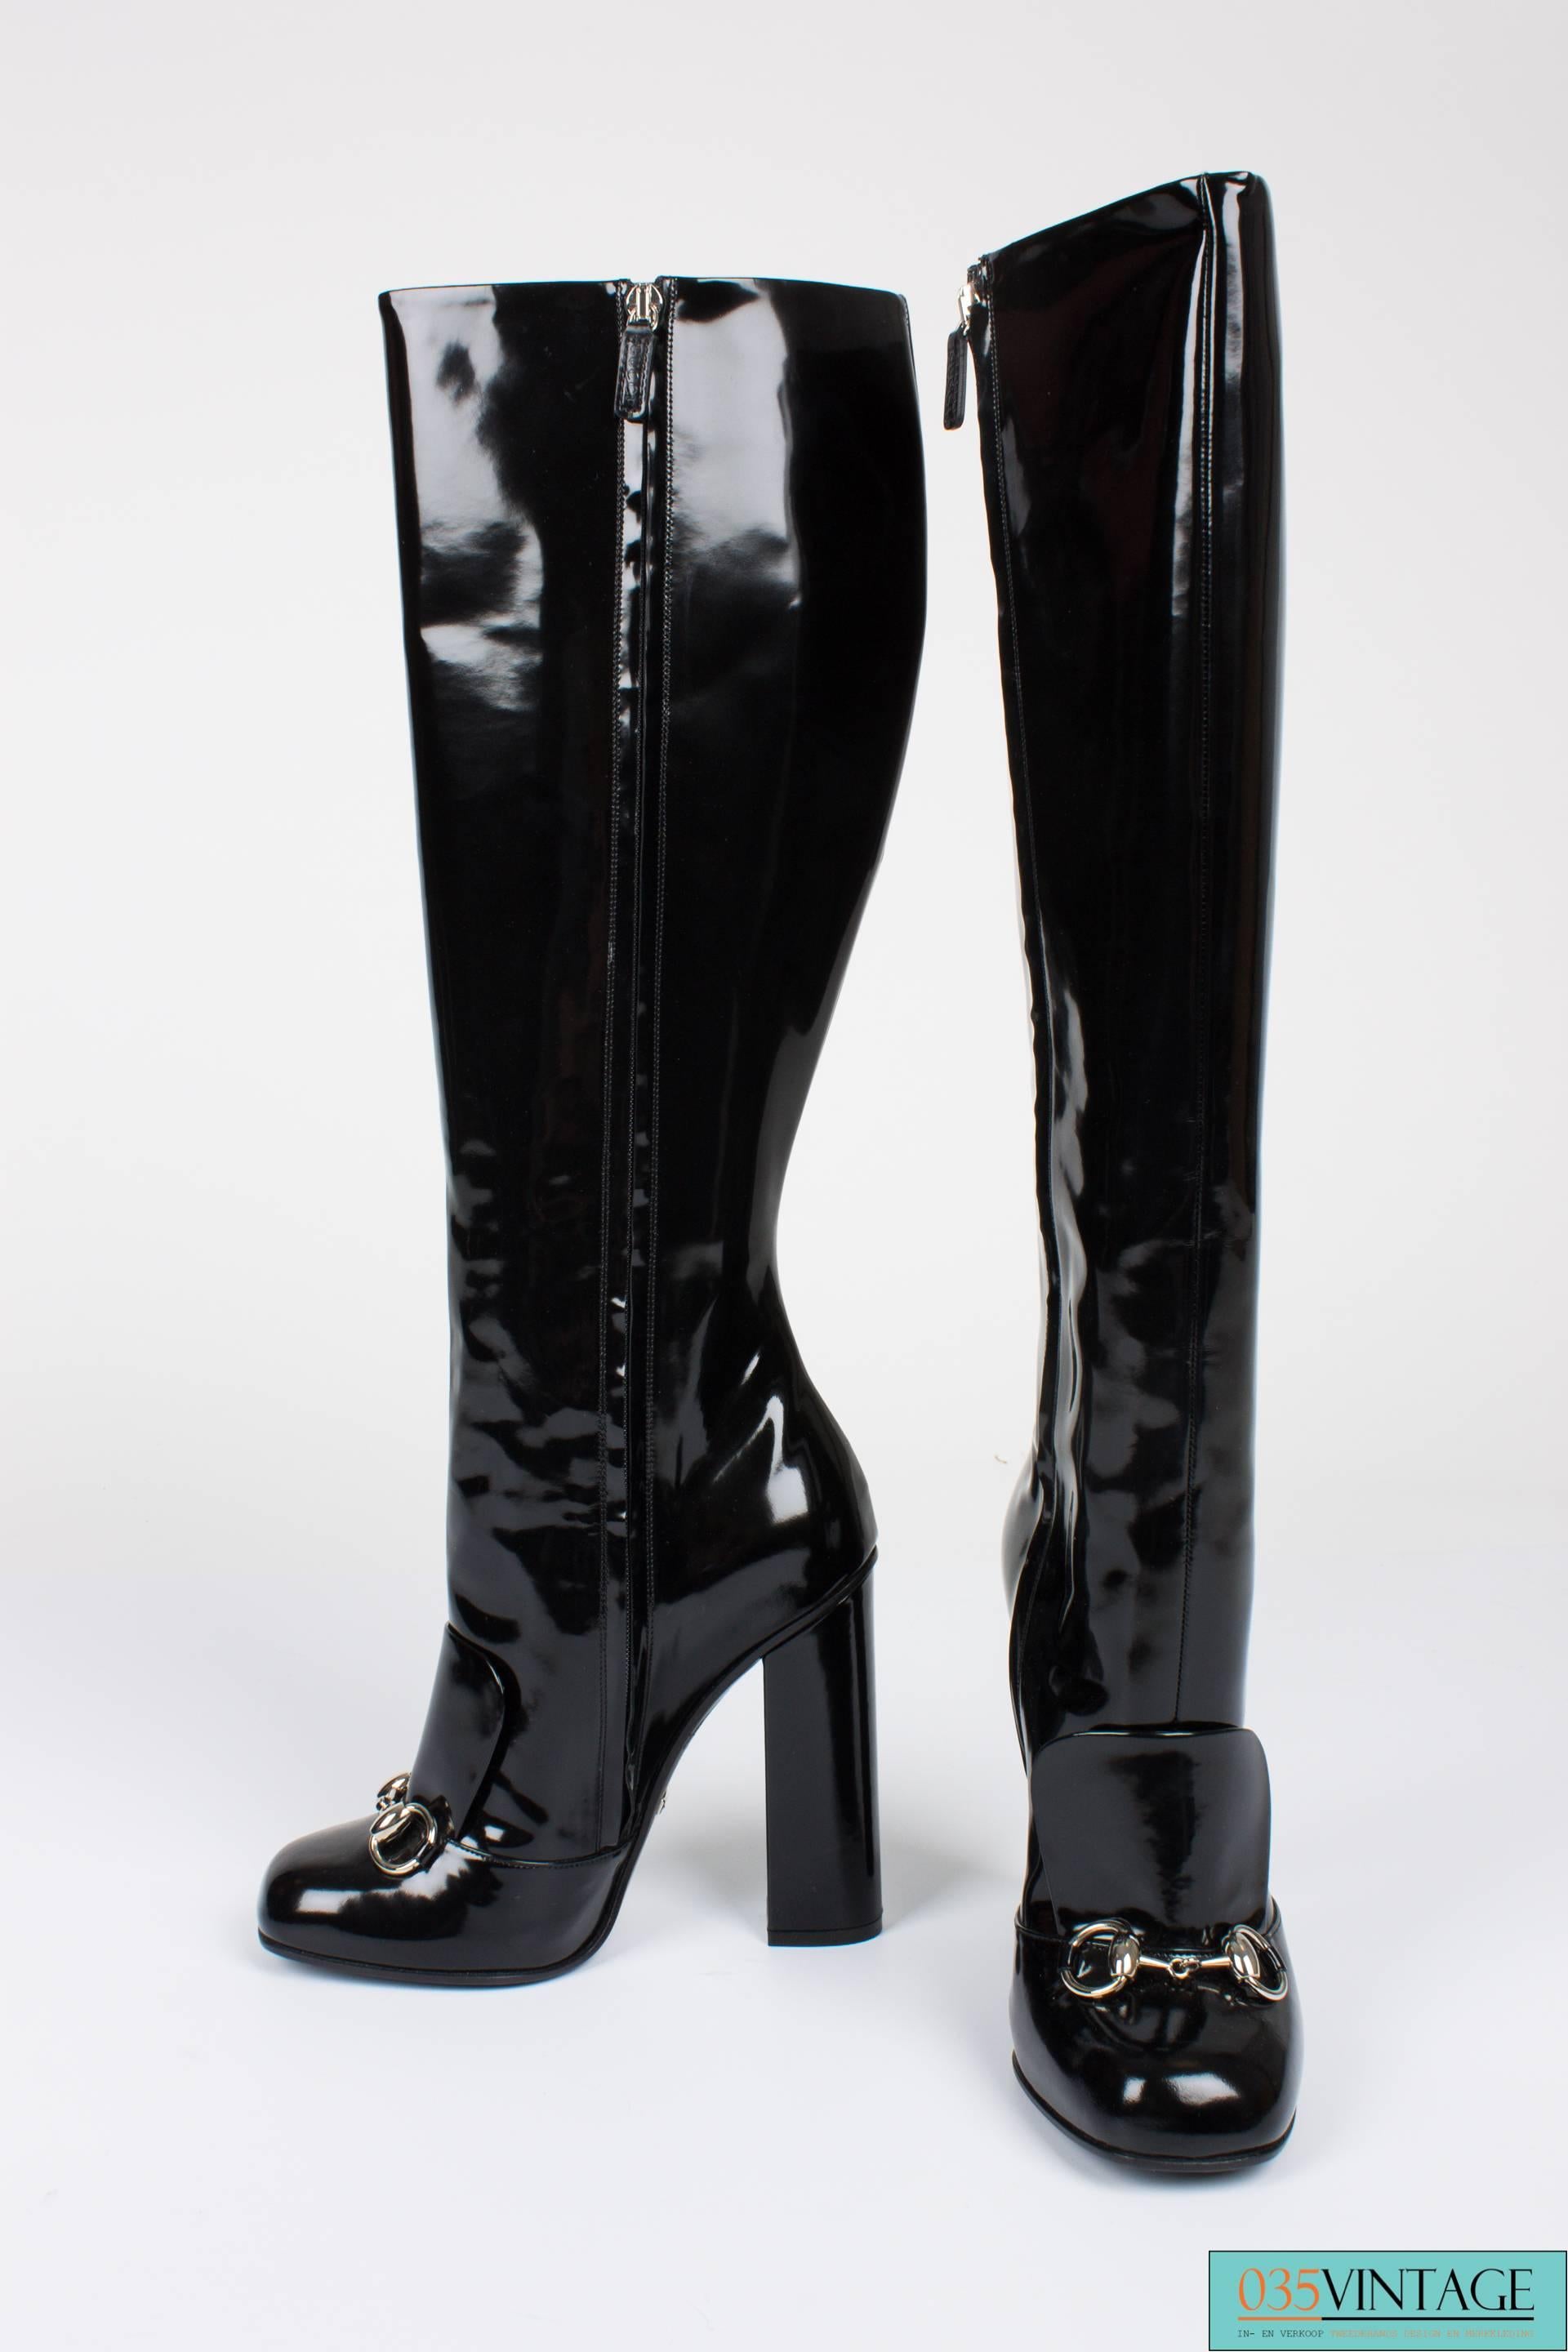 Soooo nice! Gucci Lillian boots in black patent leather, high heeled and a zipped shaft.

A silvertone horsebit on the foot, stirdy straight heel that measures 12 centimeters. Slightly square toe, shaft measures as much as 43 centimeters. Lined